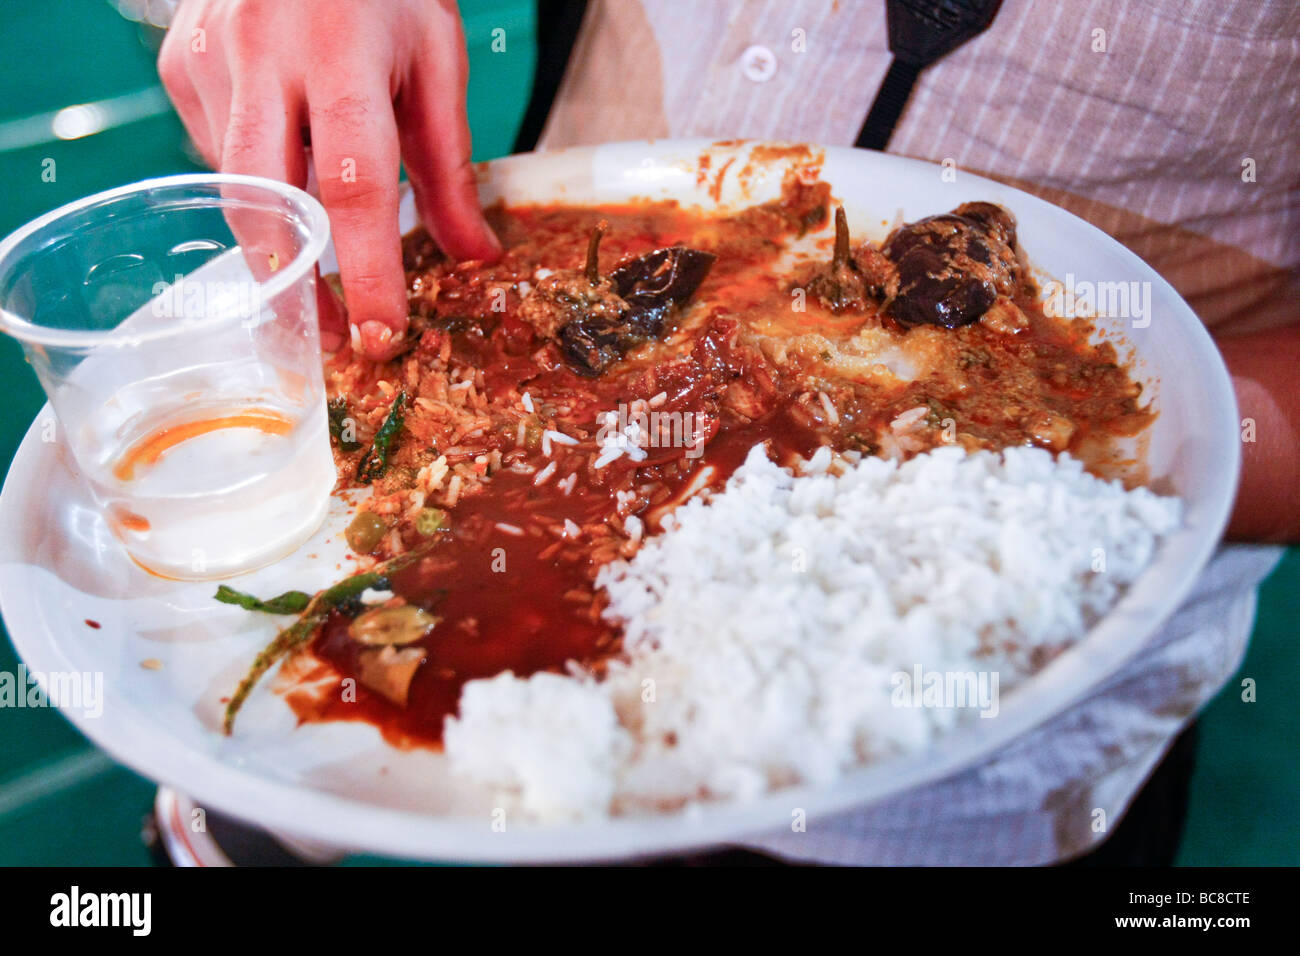 A westerner eats an Indian meal directly with his hands in the traditional south Indian way. Stock Photo